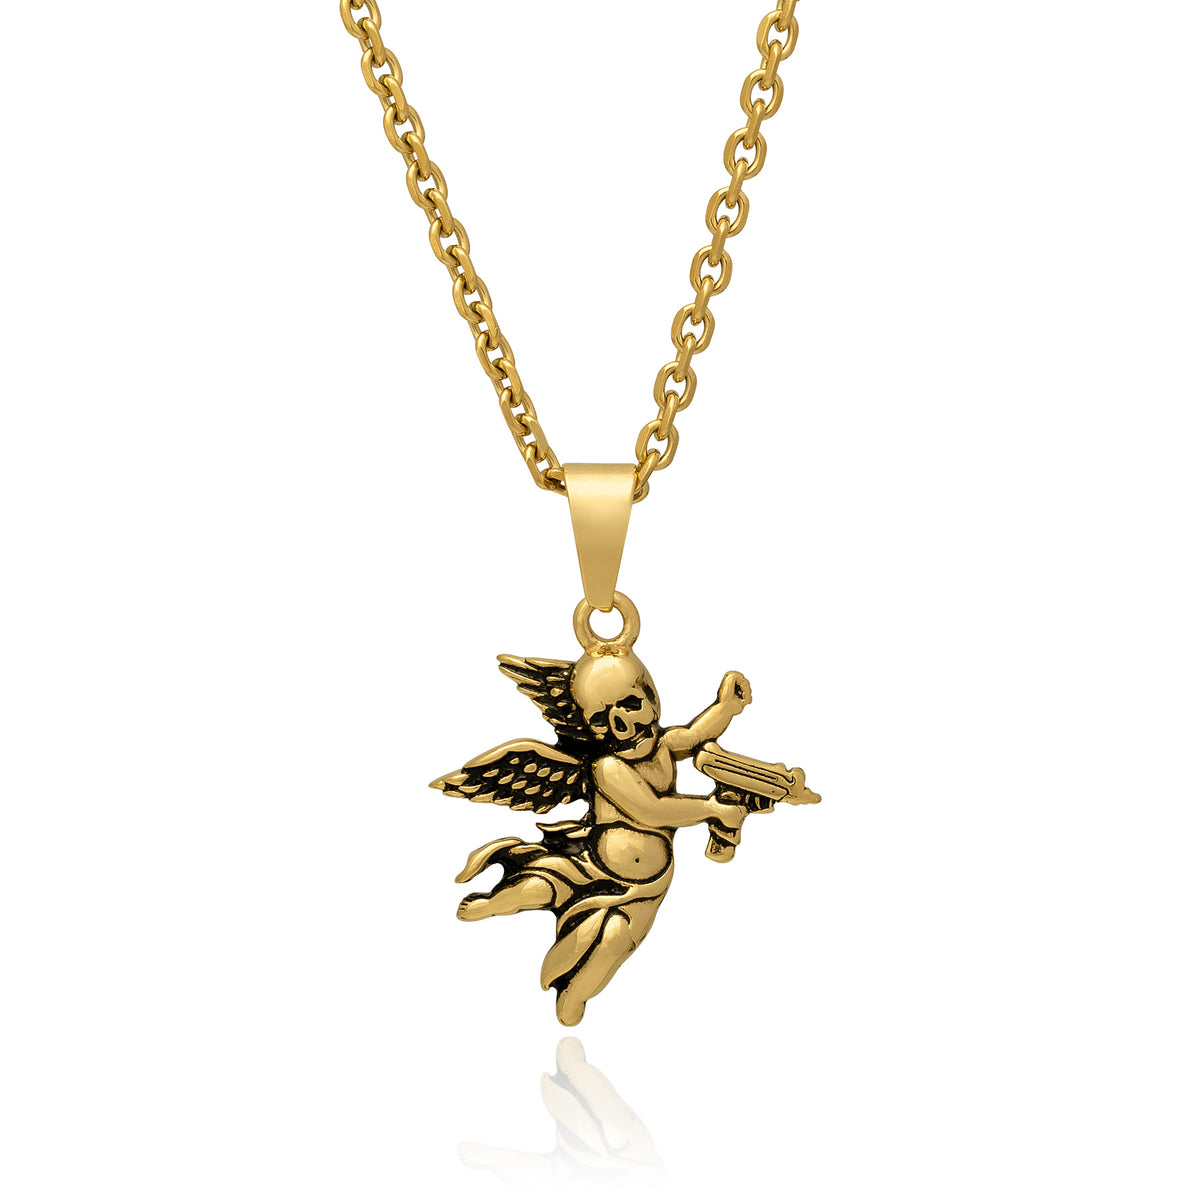 Cupid with weapon pendant necklace in gold